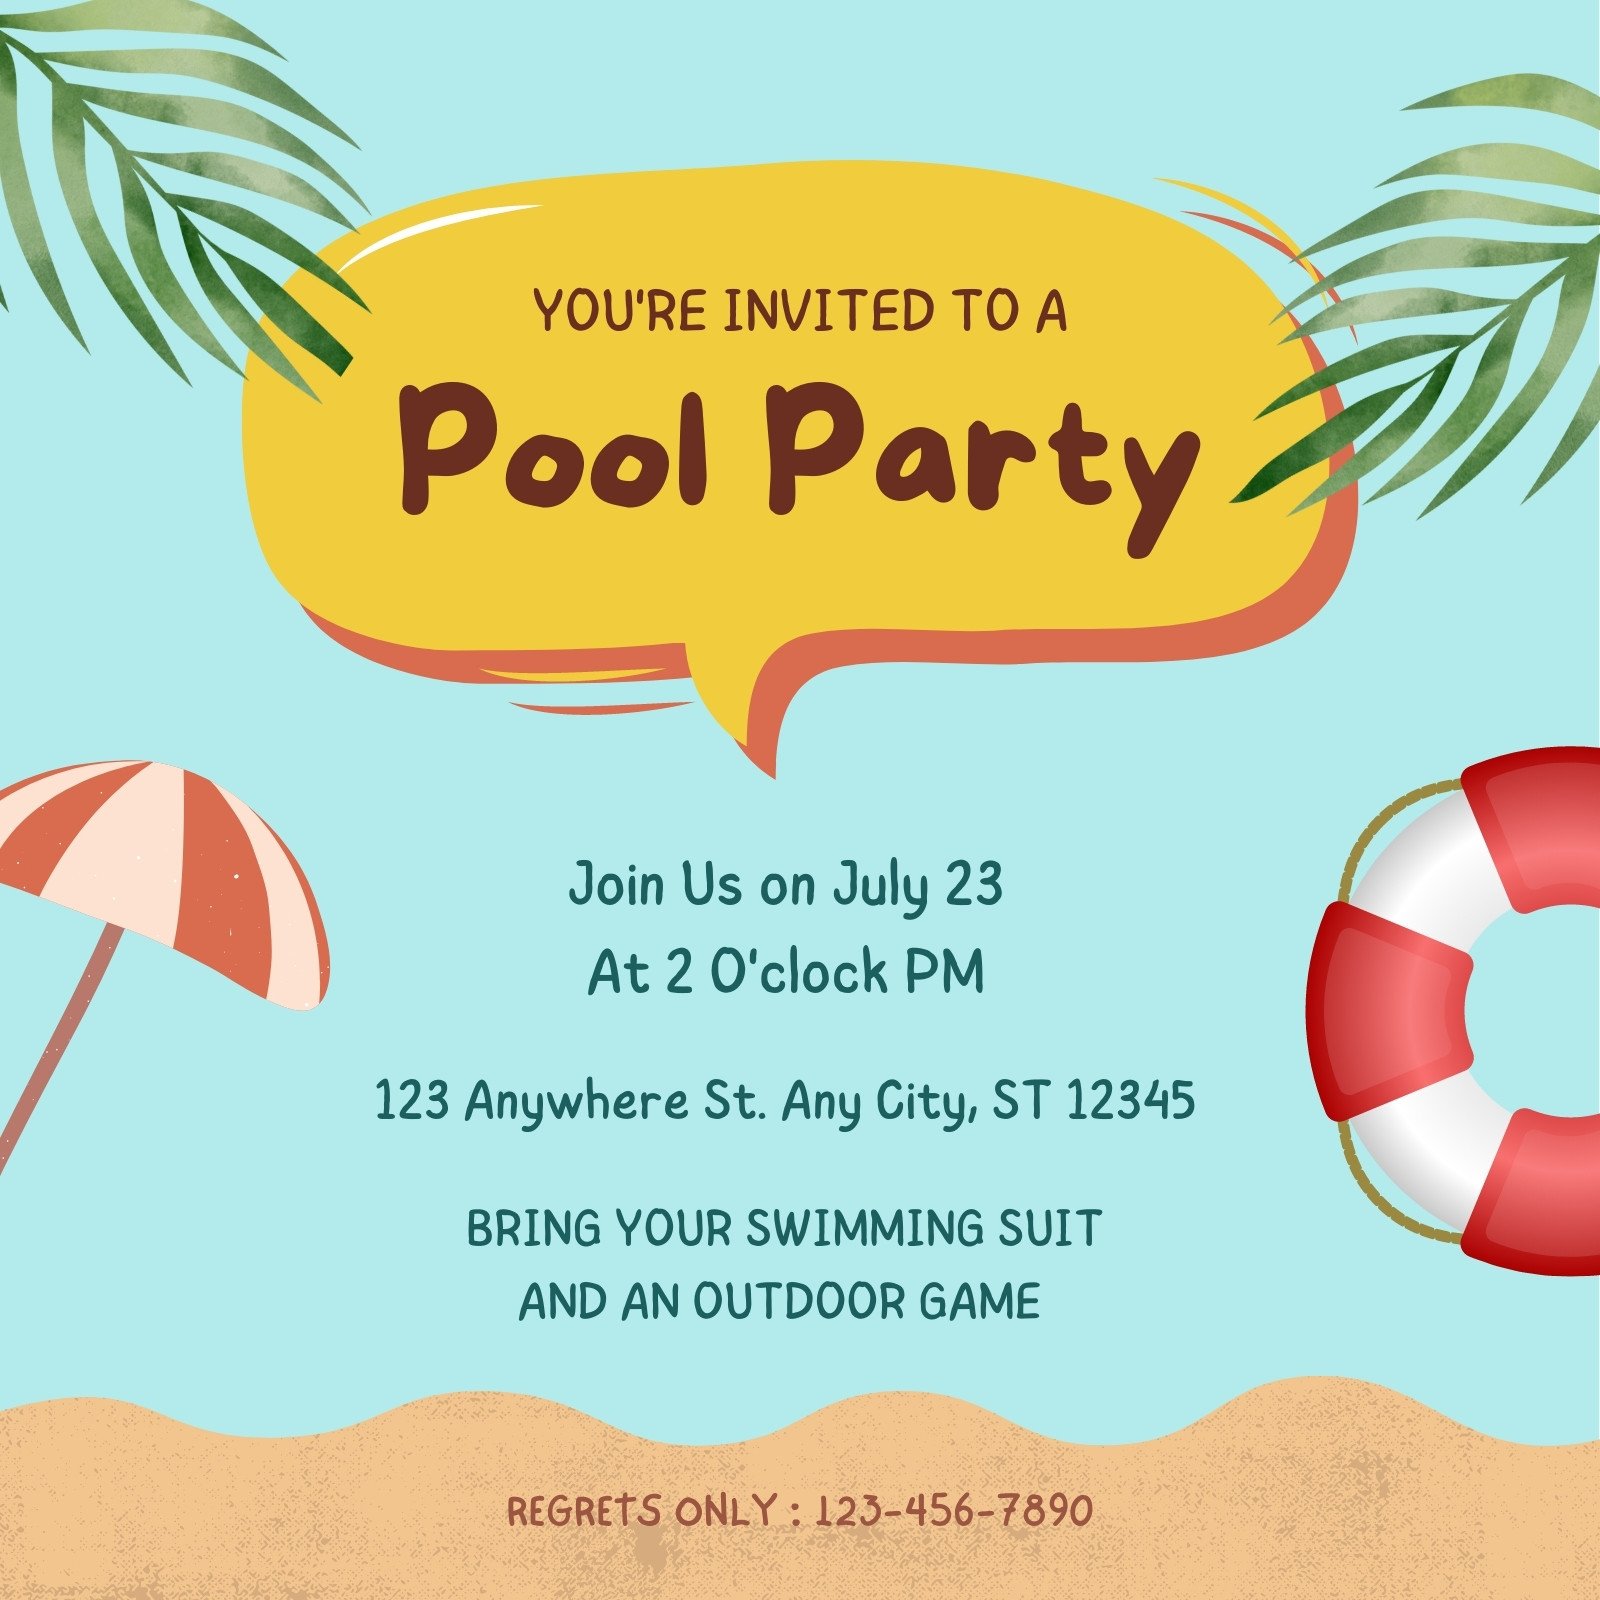 Pool Party Invitation Card Template On Swimming Pool Background - Vector  Illustration PNG Images